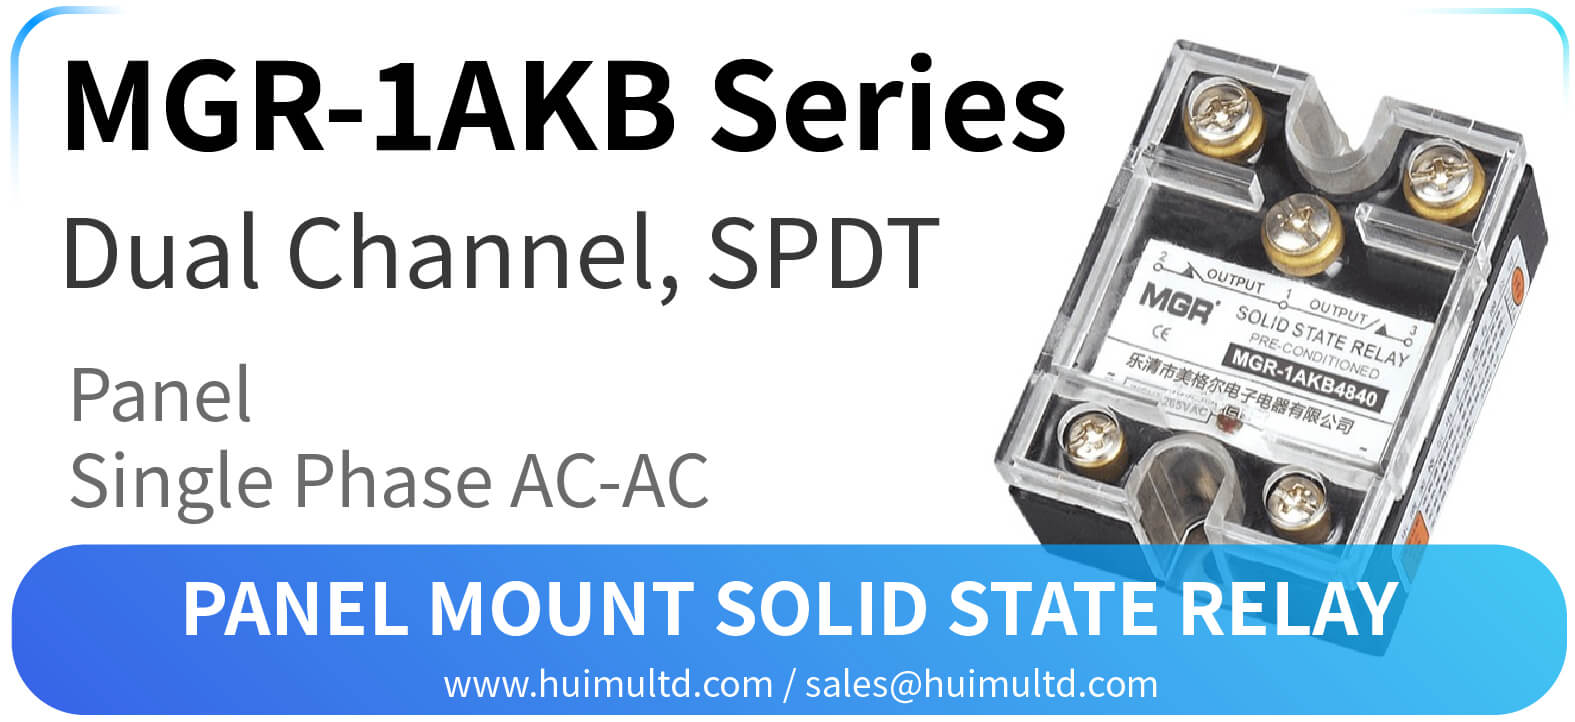 MGR-1AKB Series Panel Mount Solid State Relay